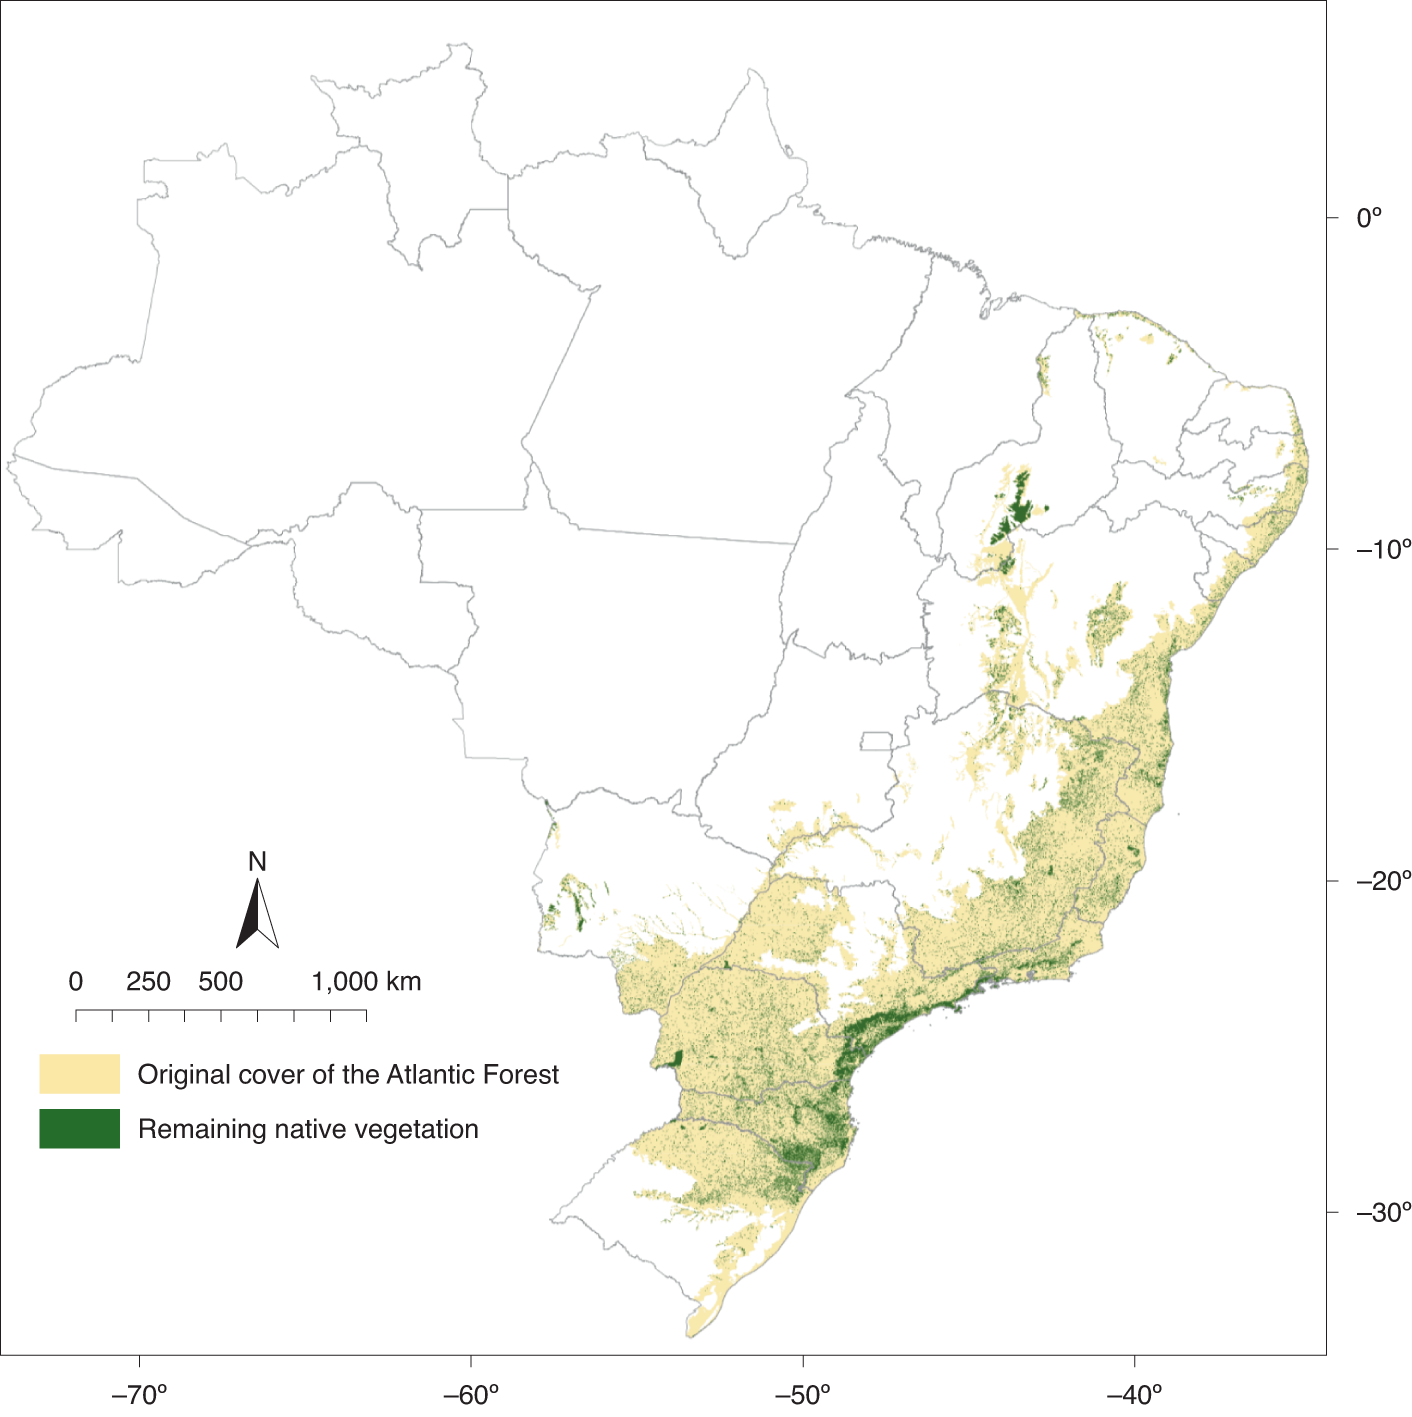 Reverse the tipping point of the Atlantic Forest for mitigation